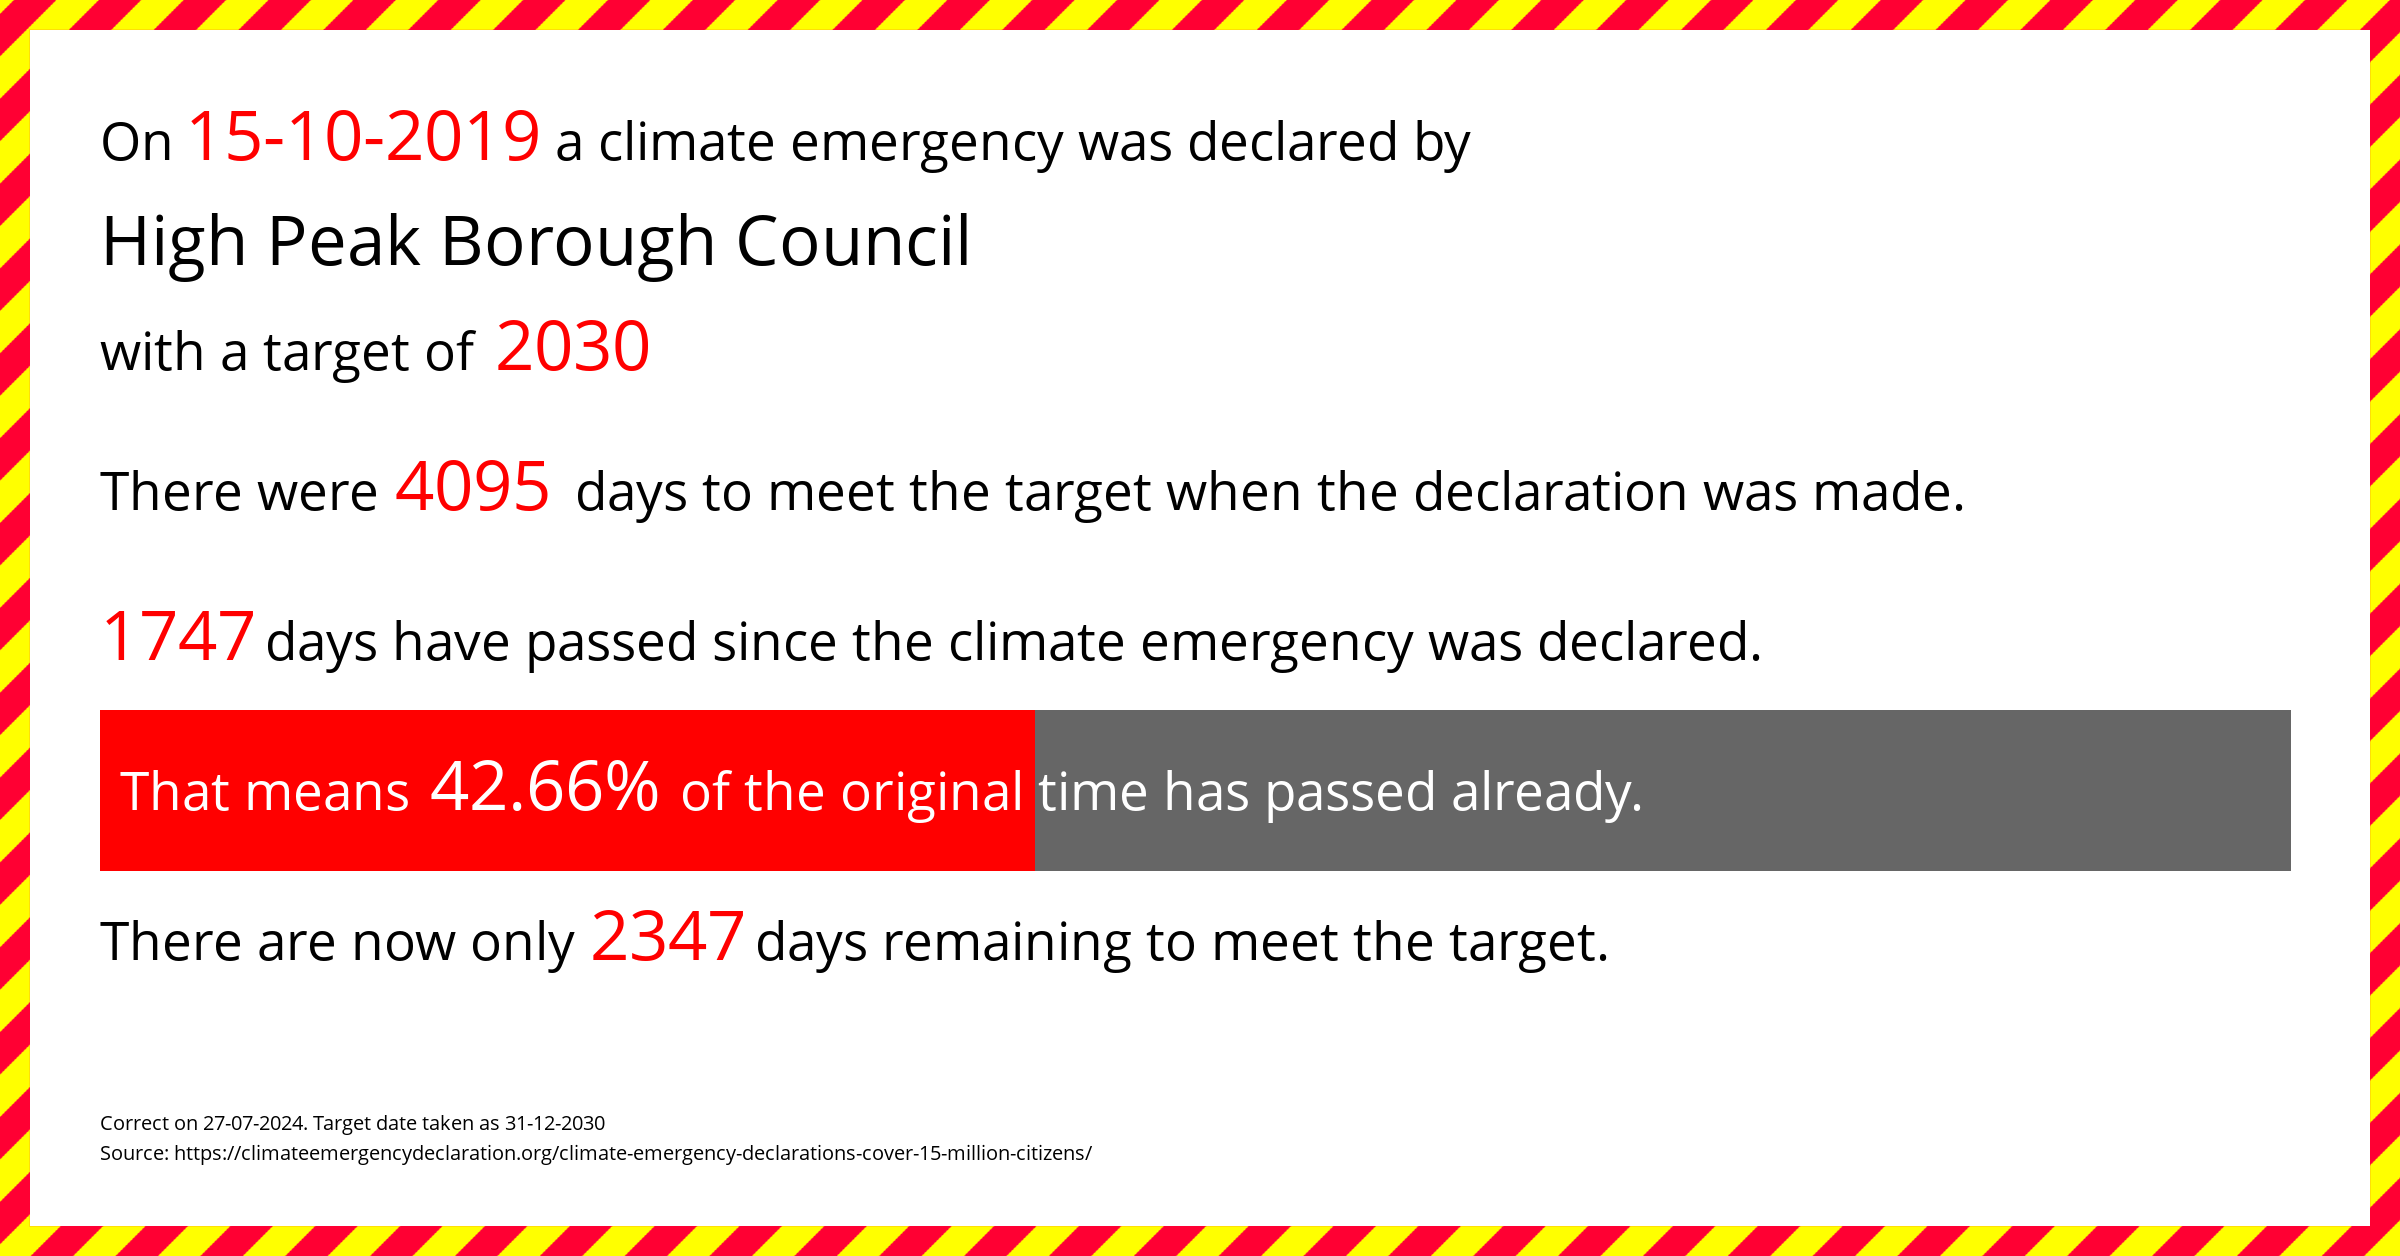 High Peak Borough Council declared a Climate emergency on Tuesday 15th October 2019, with a target of 2030.